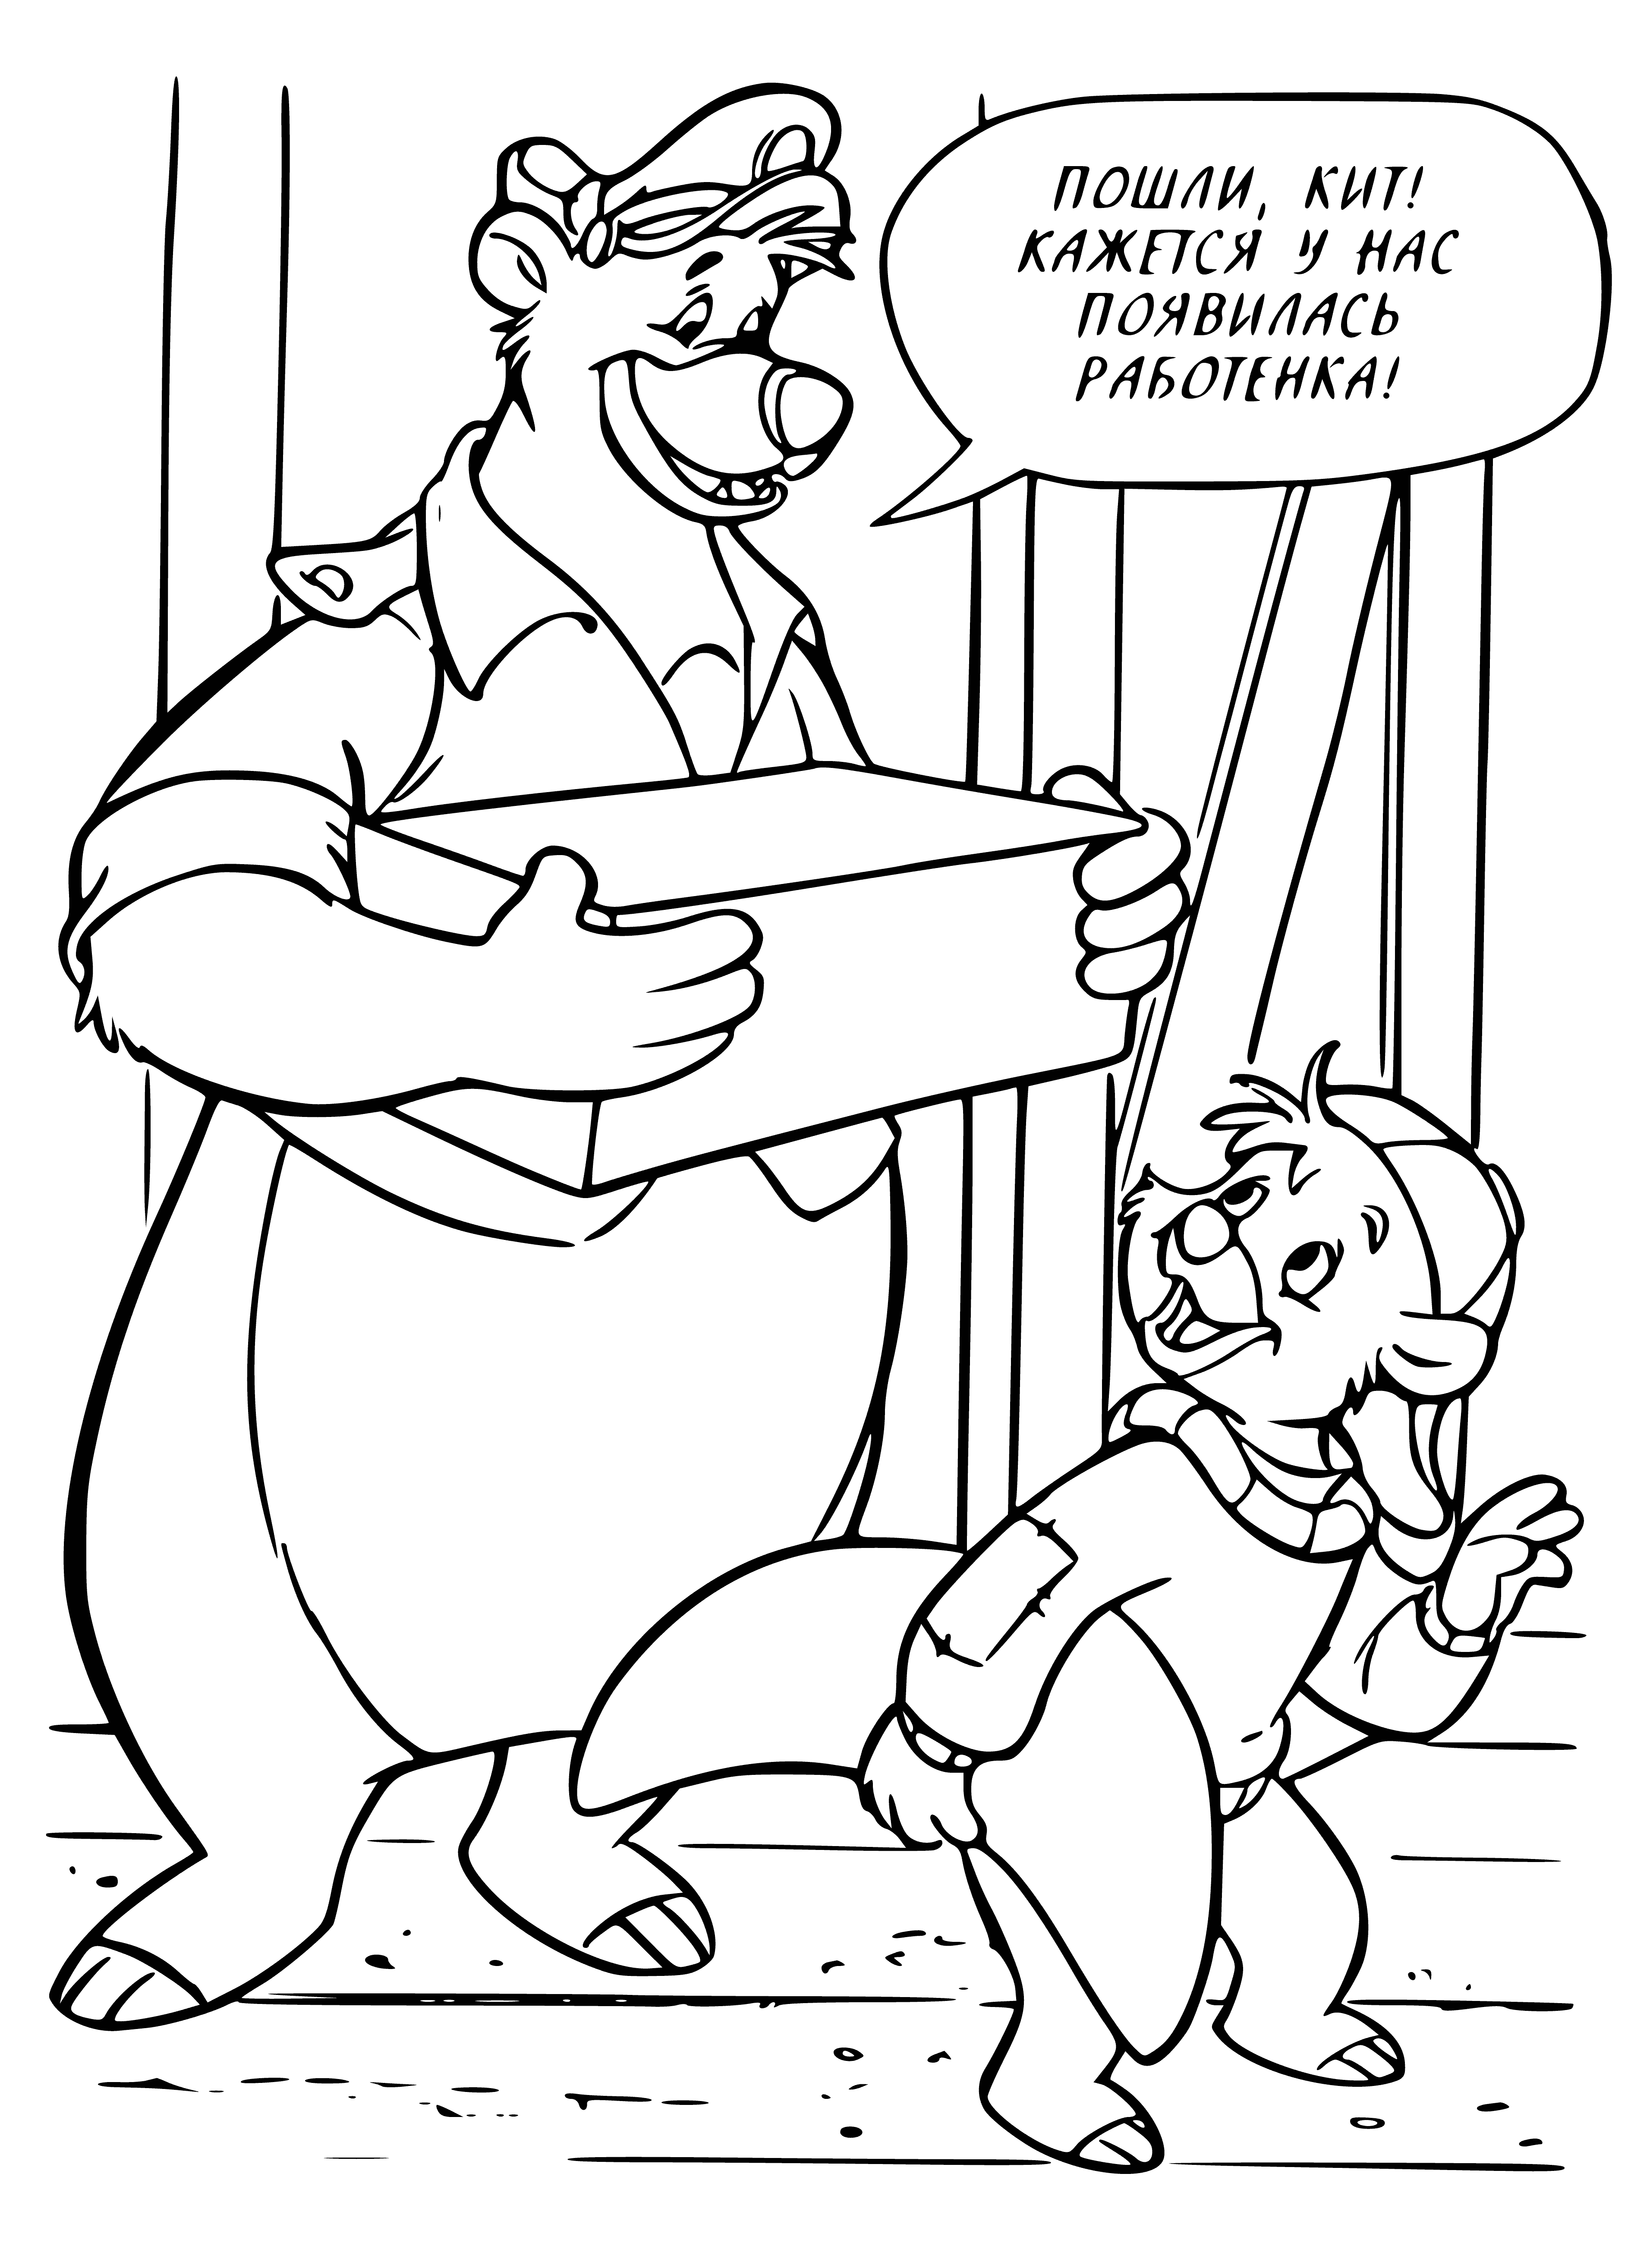 coloring page: A small tiger cub (Kit) and a big brown bear (Baloo) stand facing each other - Kit standing, Baloo sitting with a big smile.